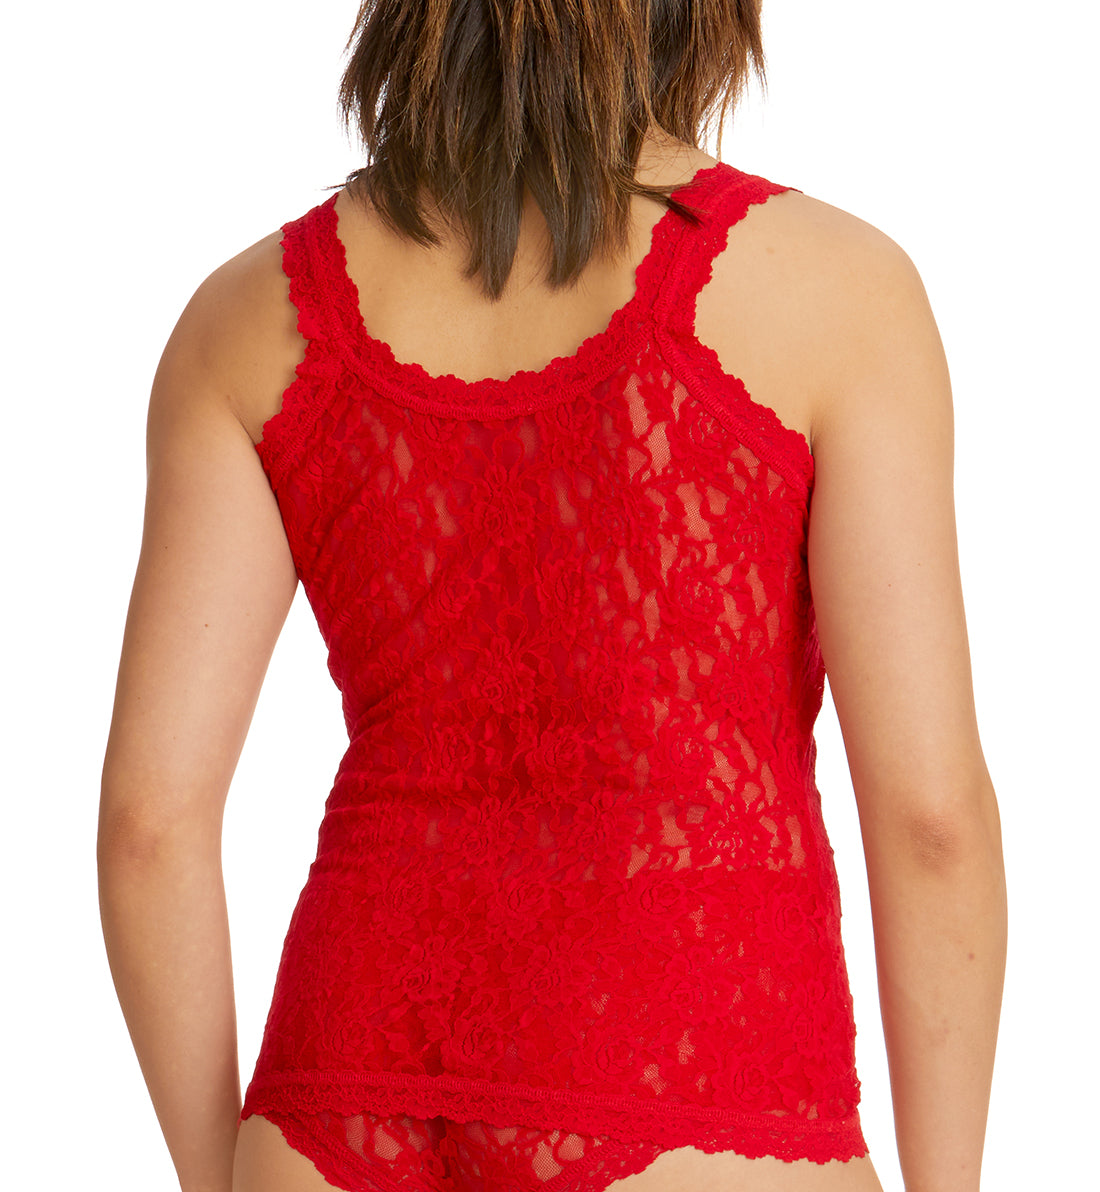 Hanky Panky Signature Lace Unlined Camisole (1390L),XS,Red - Red,XS